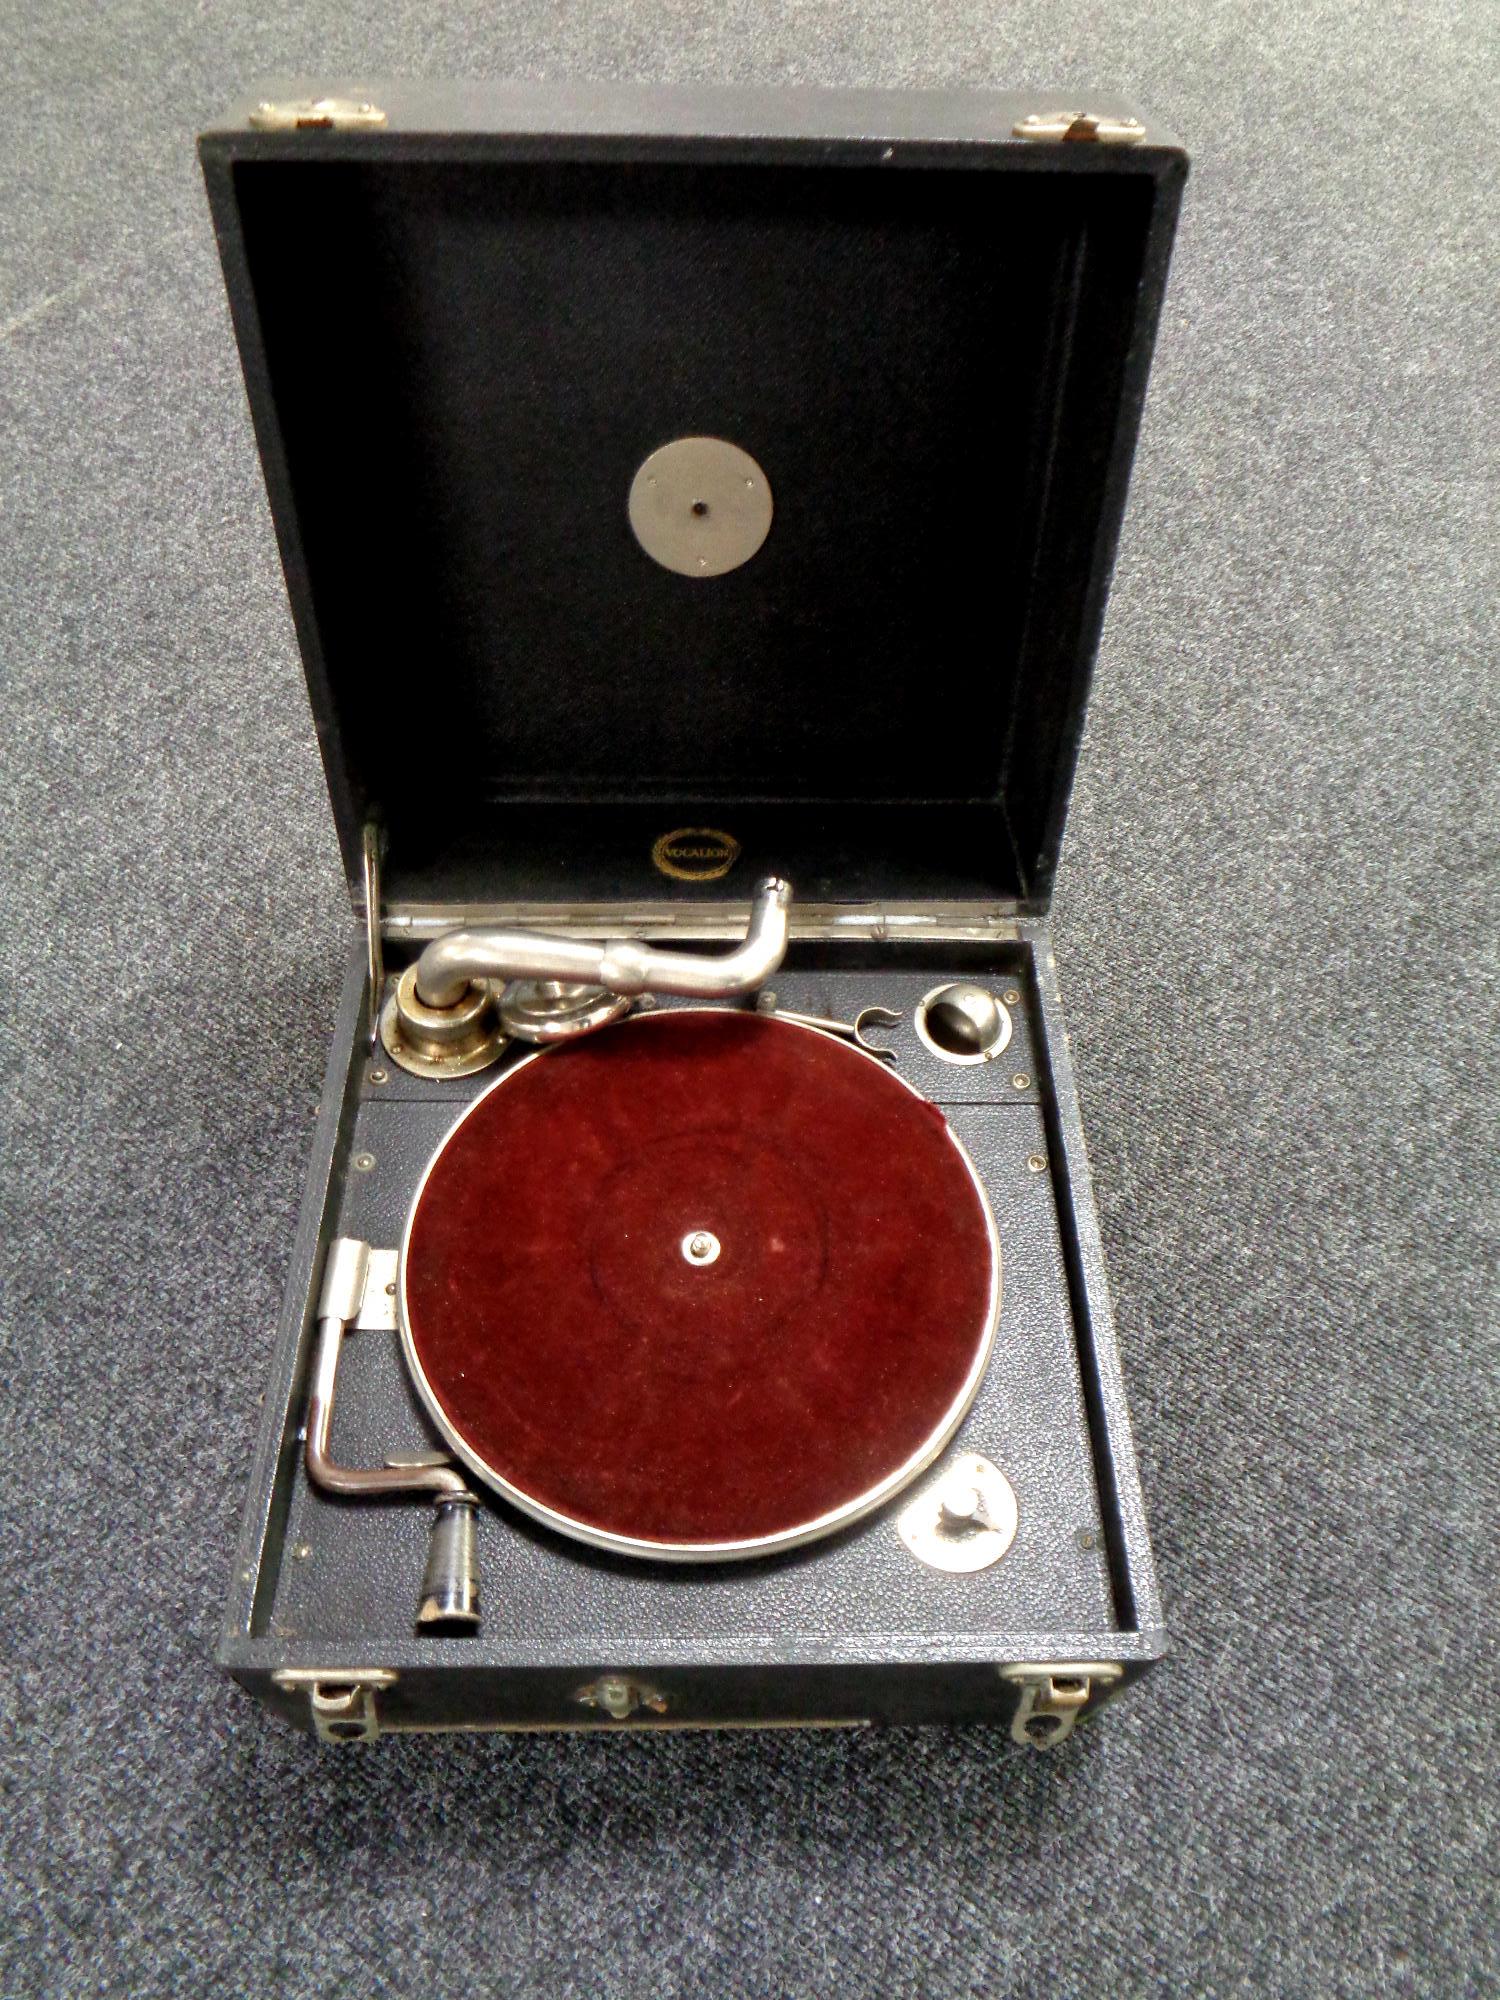 An early 20th century Vocalion portable gramophone